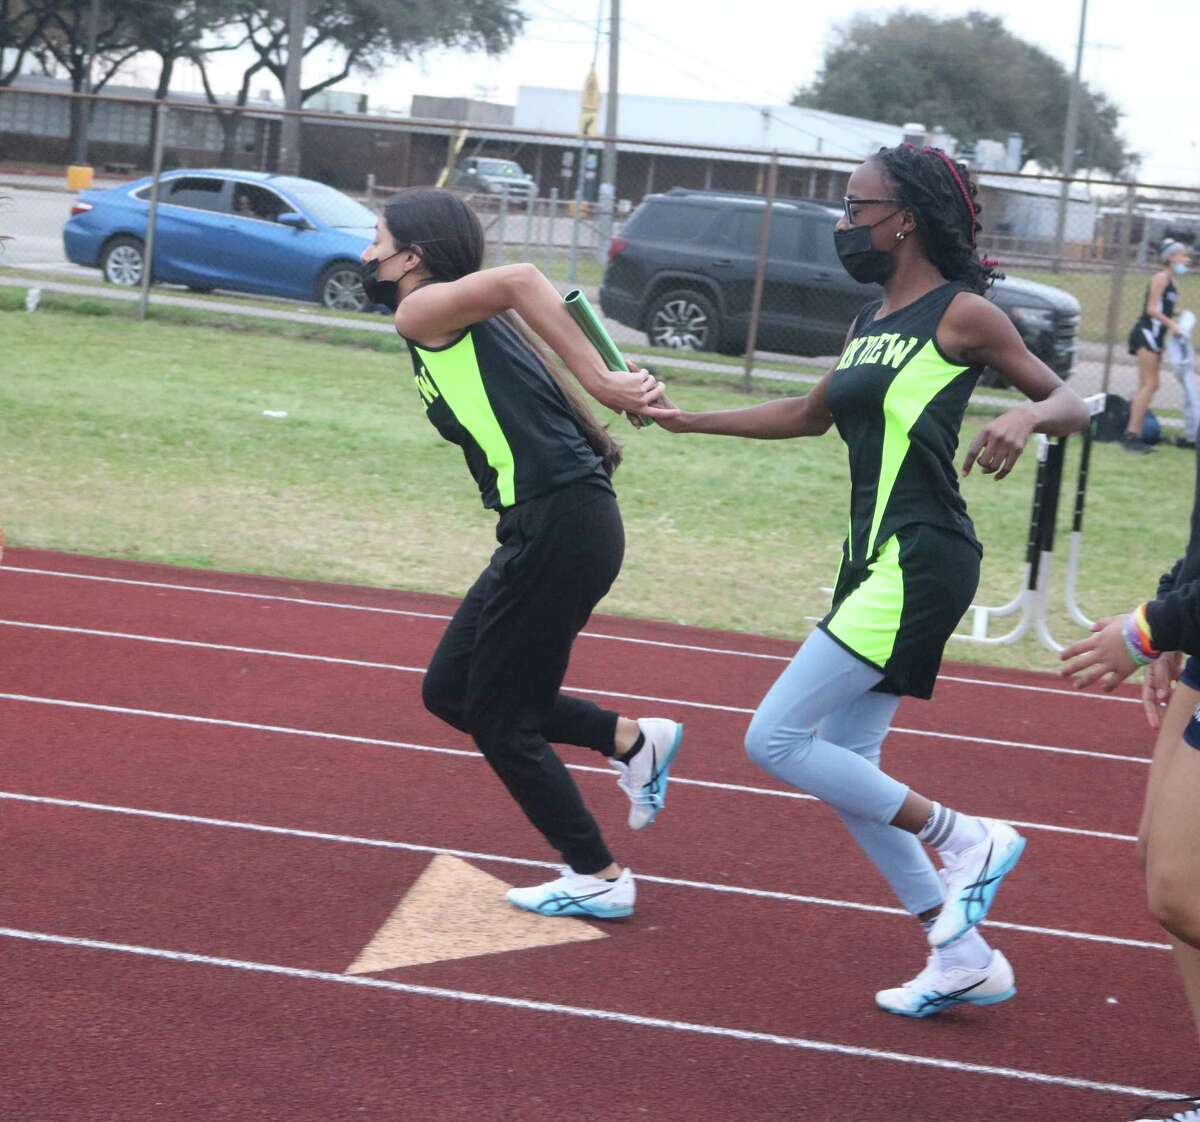 A Park View pair completes the last handoff during the 4 by 200 relay race Monday night. The team secured the bronze medal in 2:07.61.